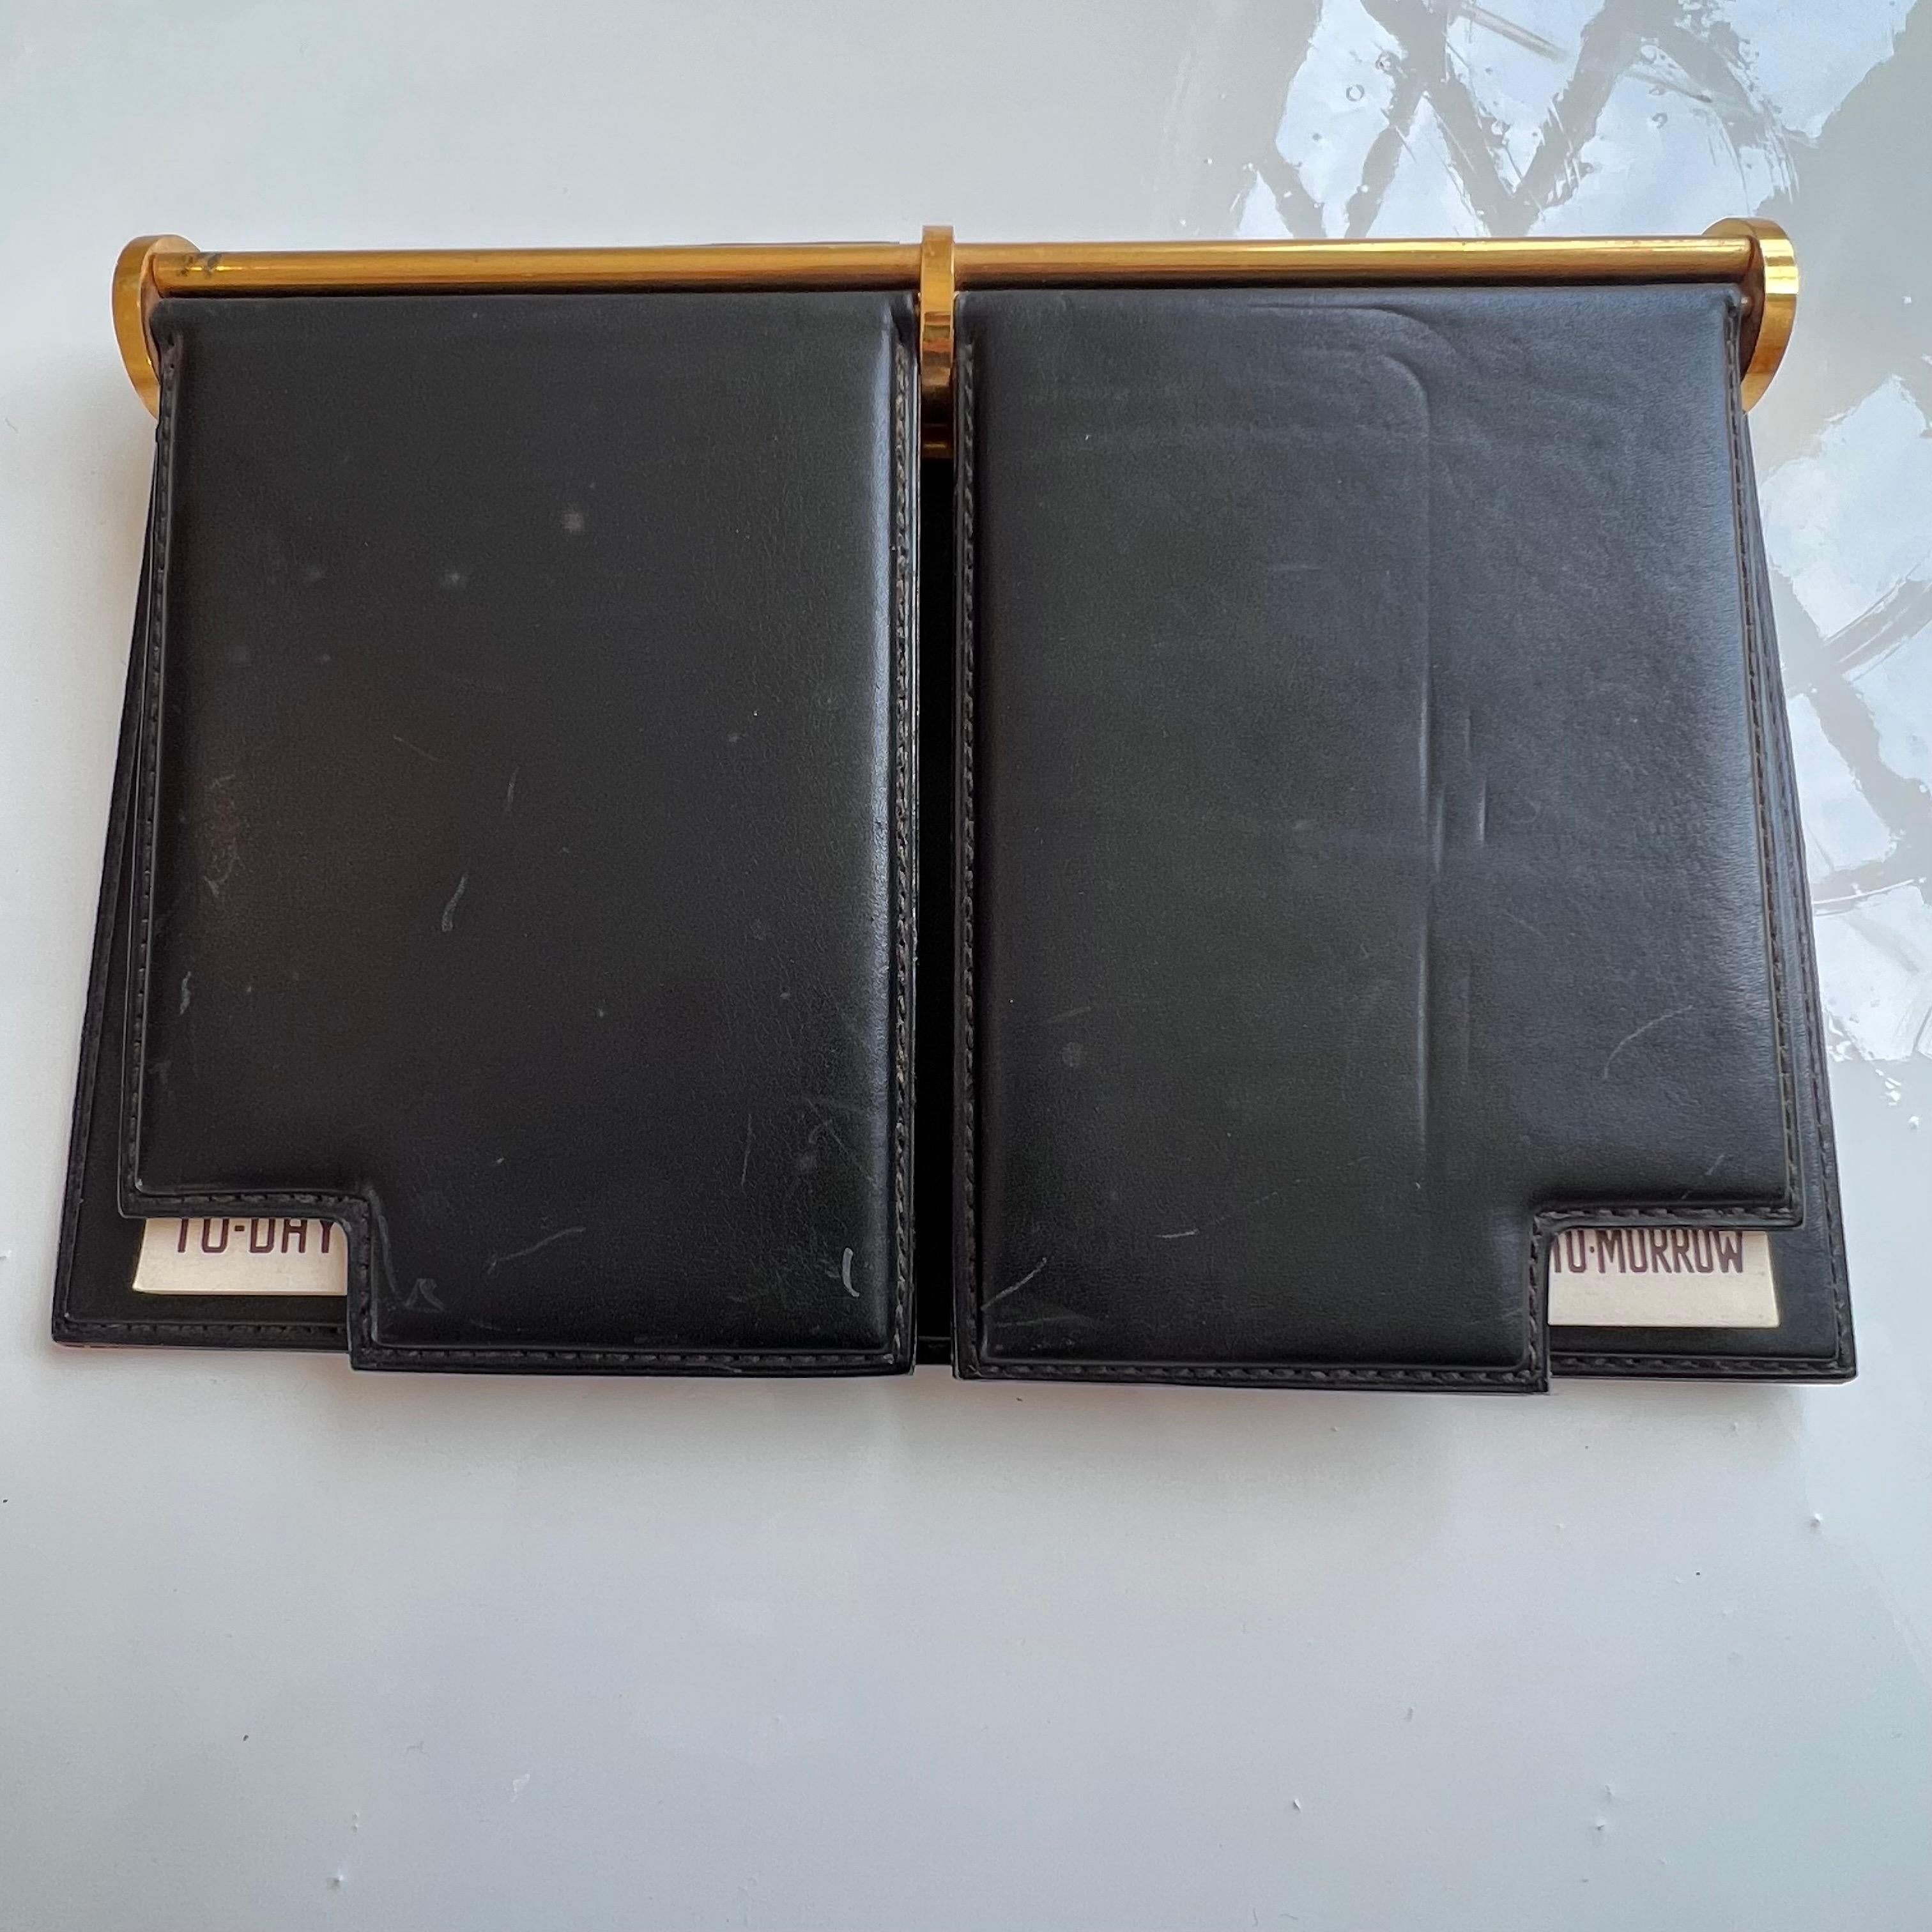 Chic black leather Gucci desk planner with brass bindings containing two notepads titled “To-day” and “To-Morrow”.  Small window at the bottom of each leather flap showing the day. Stamped “Made in Italy by Gucci” on the underside. Wonderful